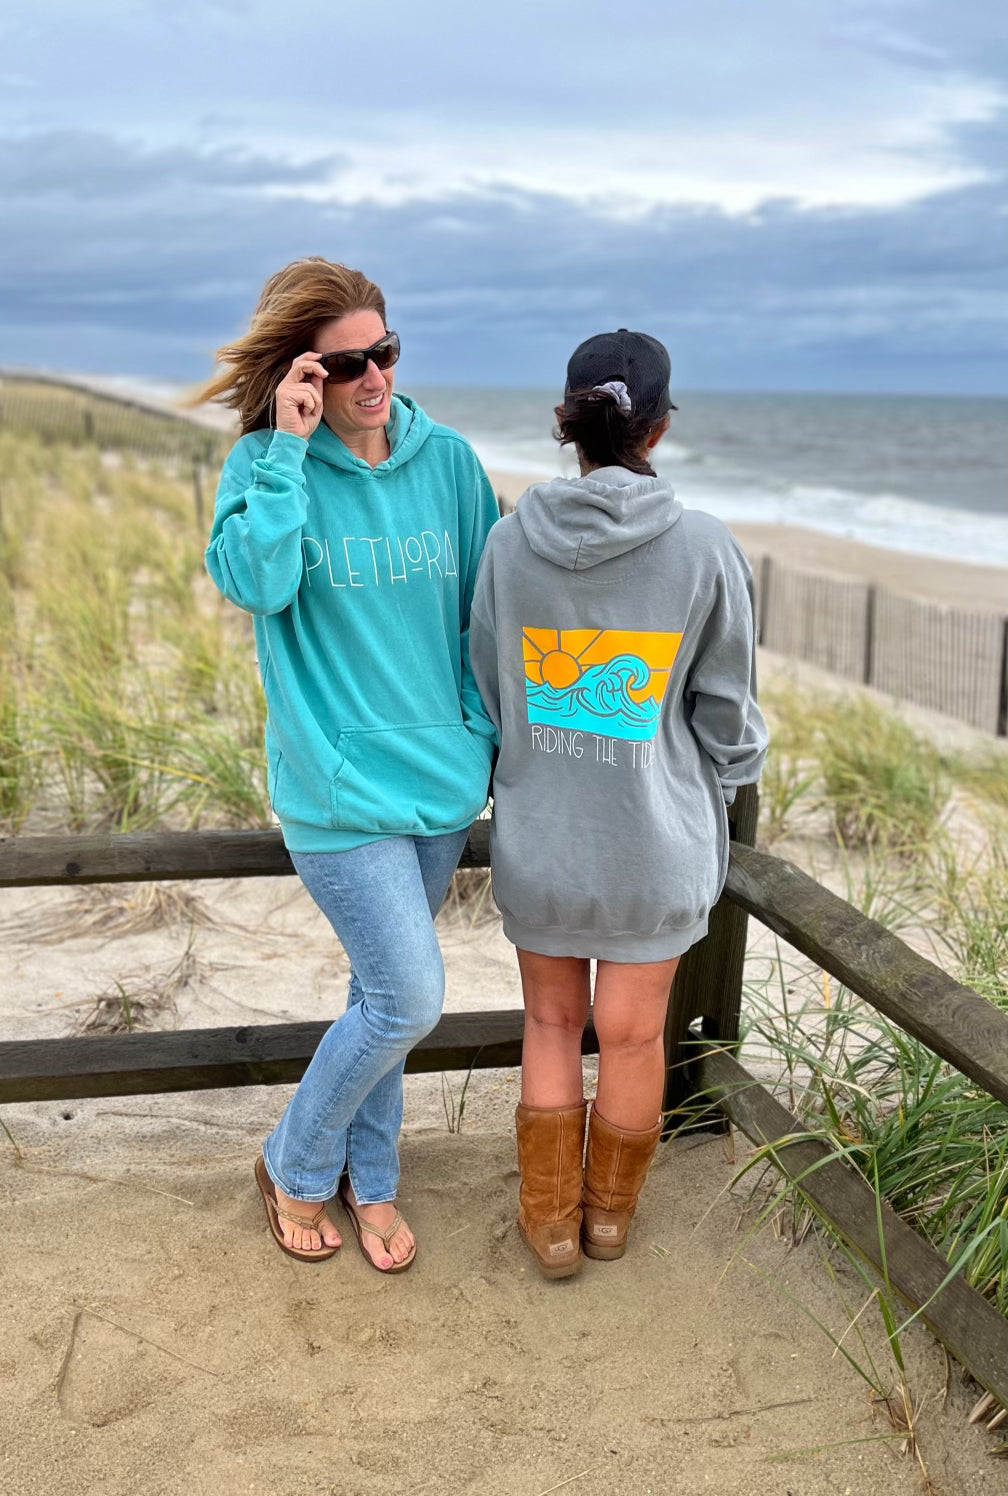 Riding The Tides Hoodie